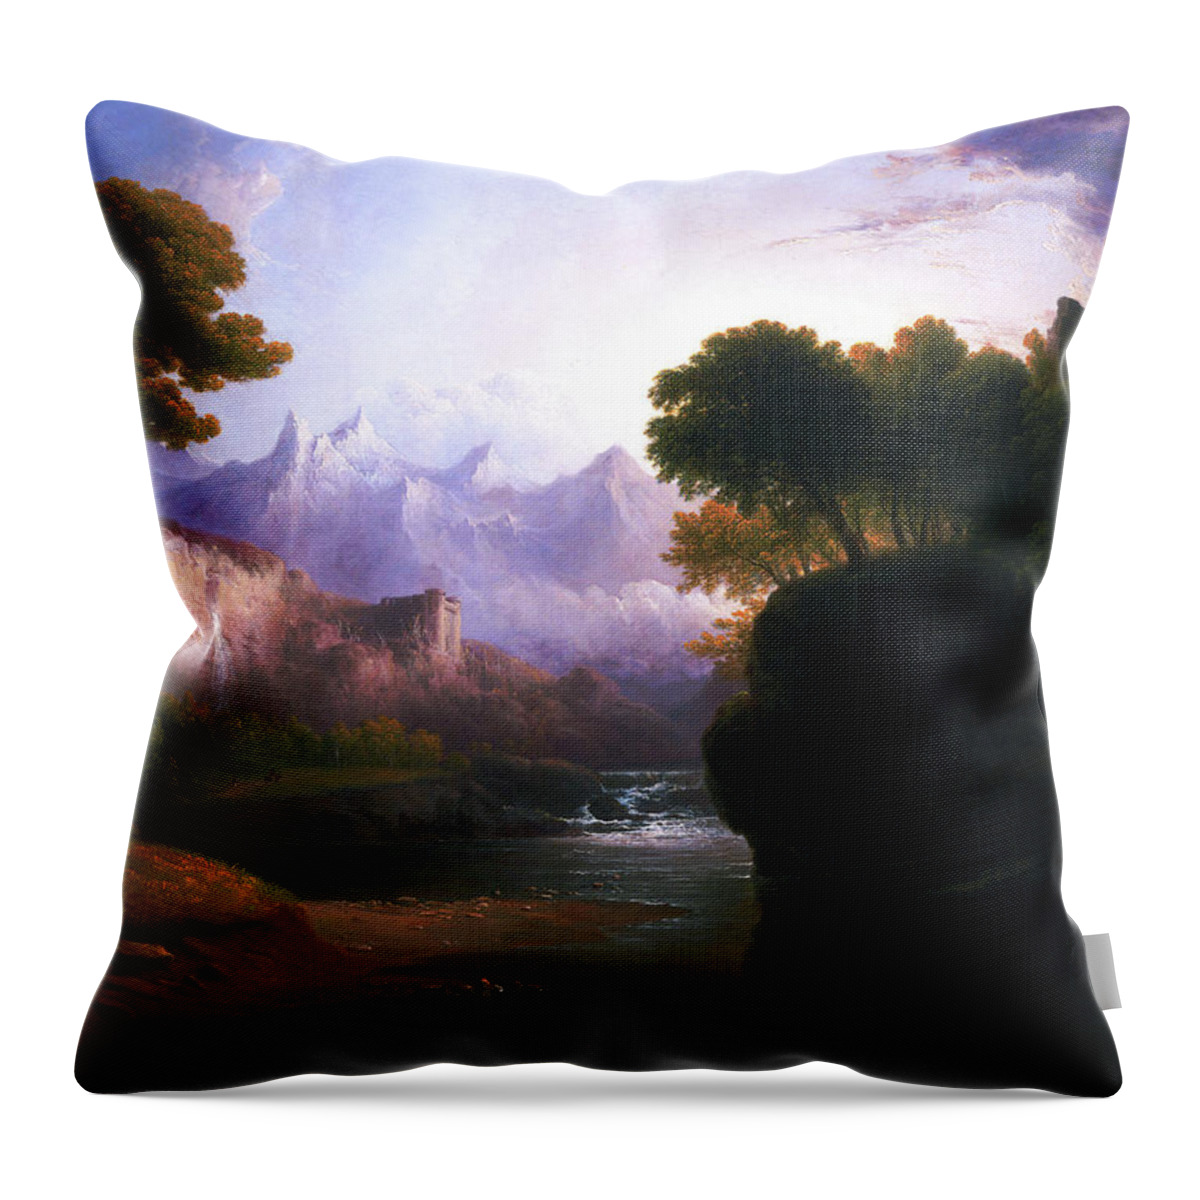 Fanciful Landscape Throw Pillow featuring the painting Fanciful Landscape By Thomas Doughty by Rolando Burbon